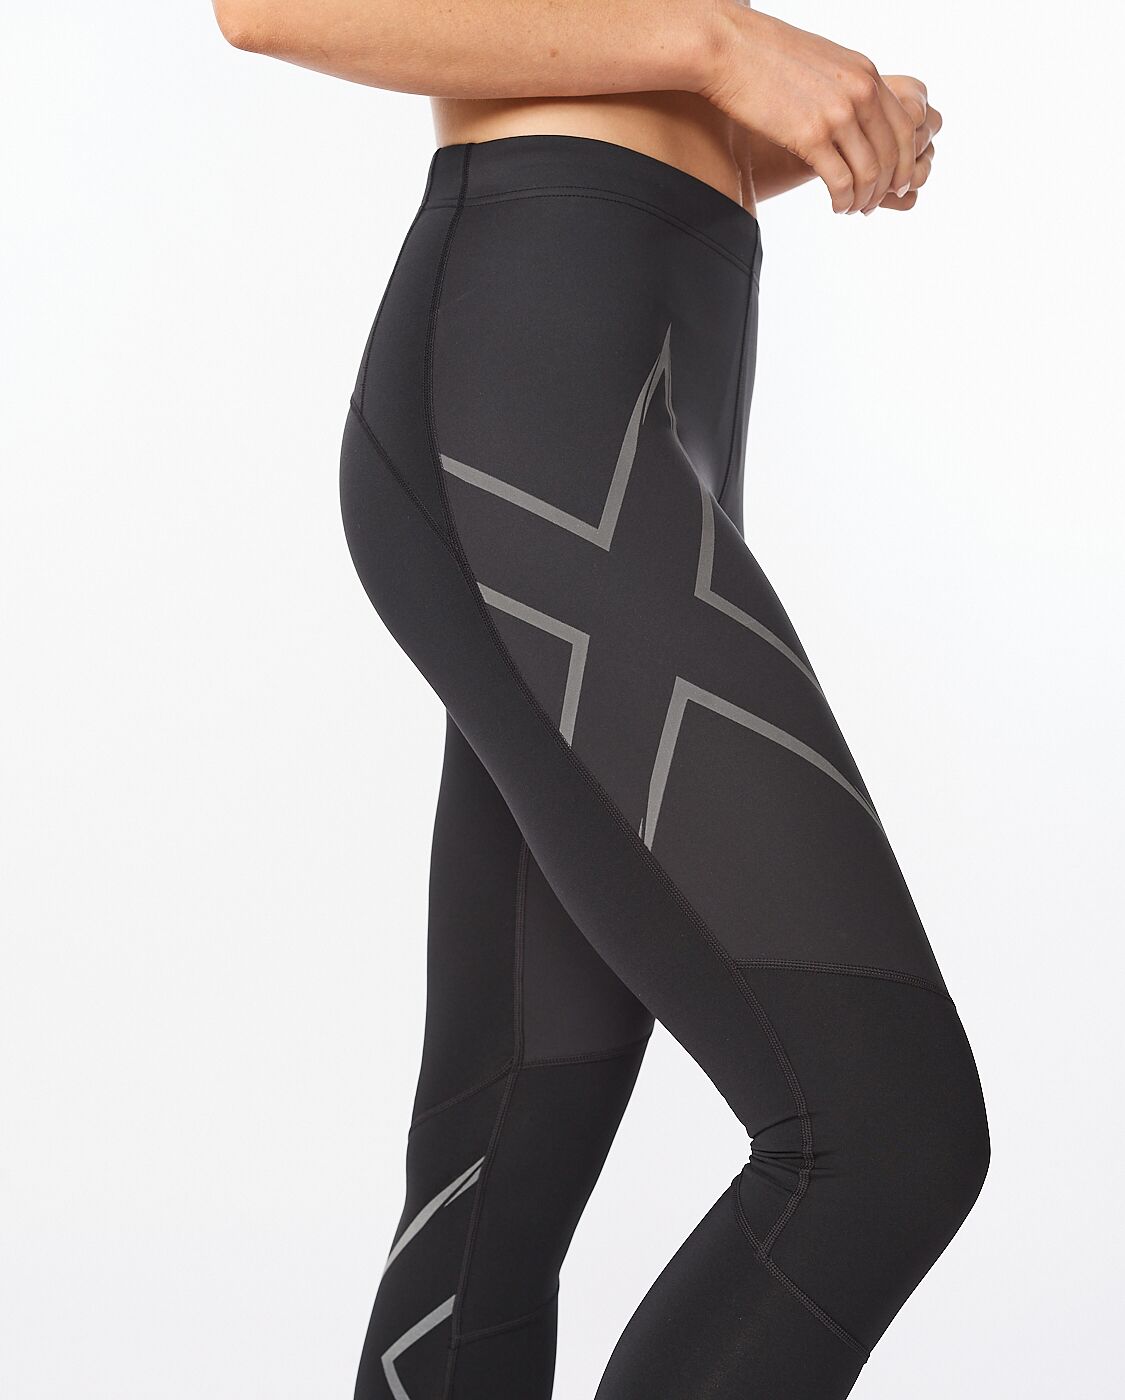 2XU Men's Ignition Shield Compression Tights - Powerful Support & Warmth -  Black/Black Reflective